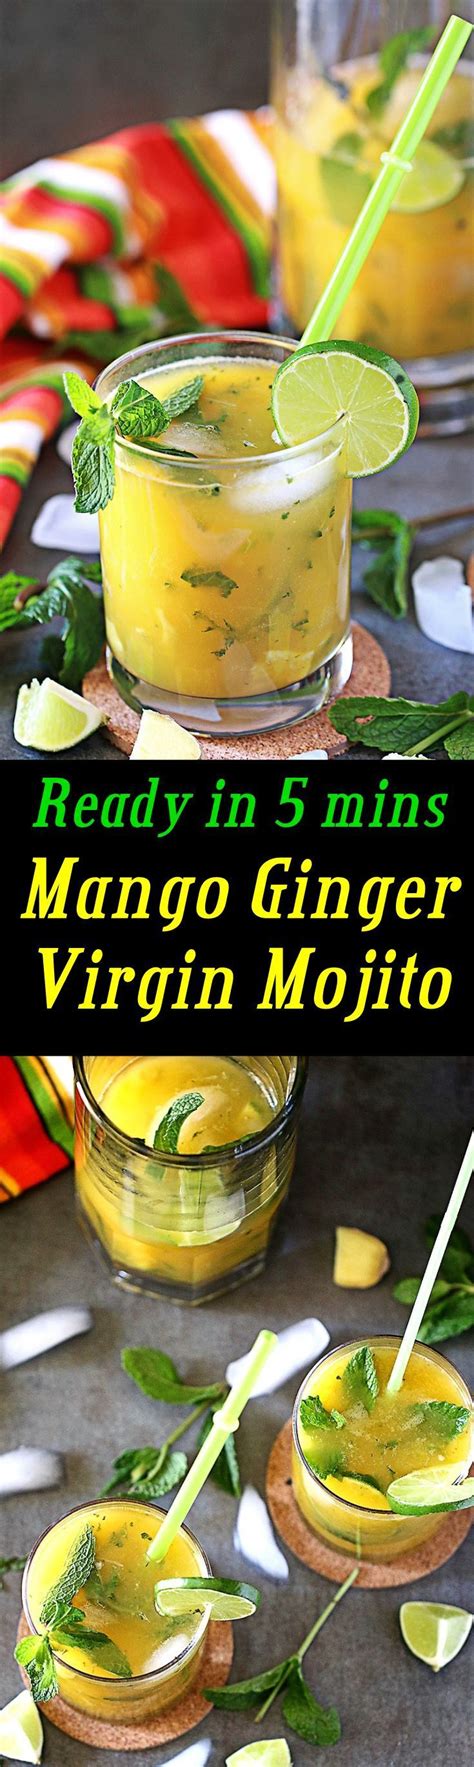 This Mango Ginger Virgin Mojito Is The Perfect Combination Of Mint